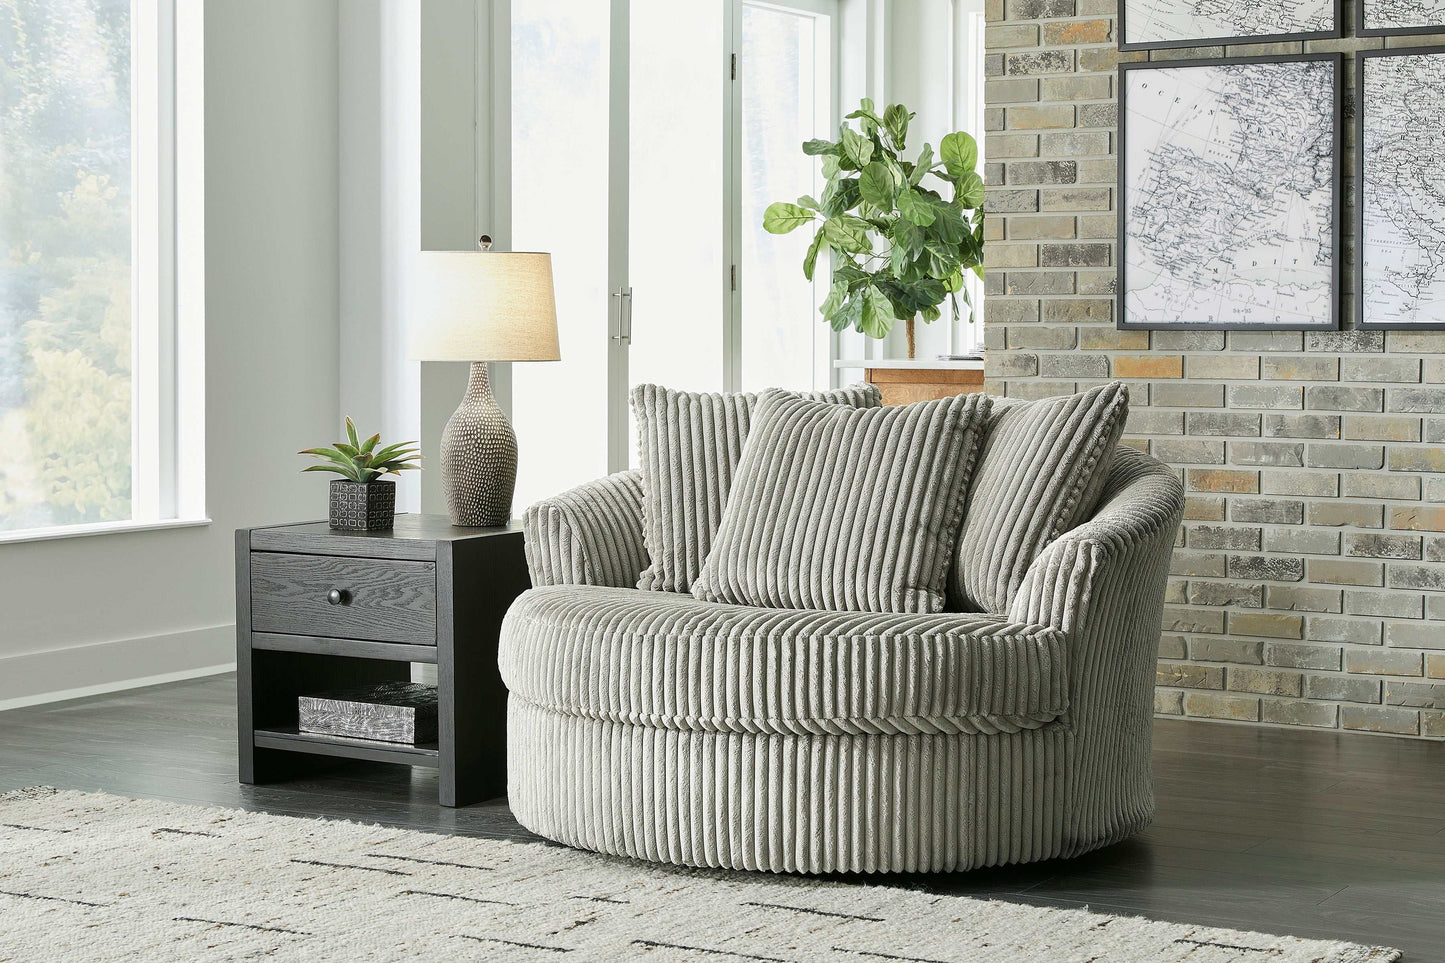 Lindyn Fog 4pc LAF Chaise Sectional